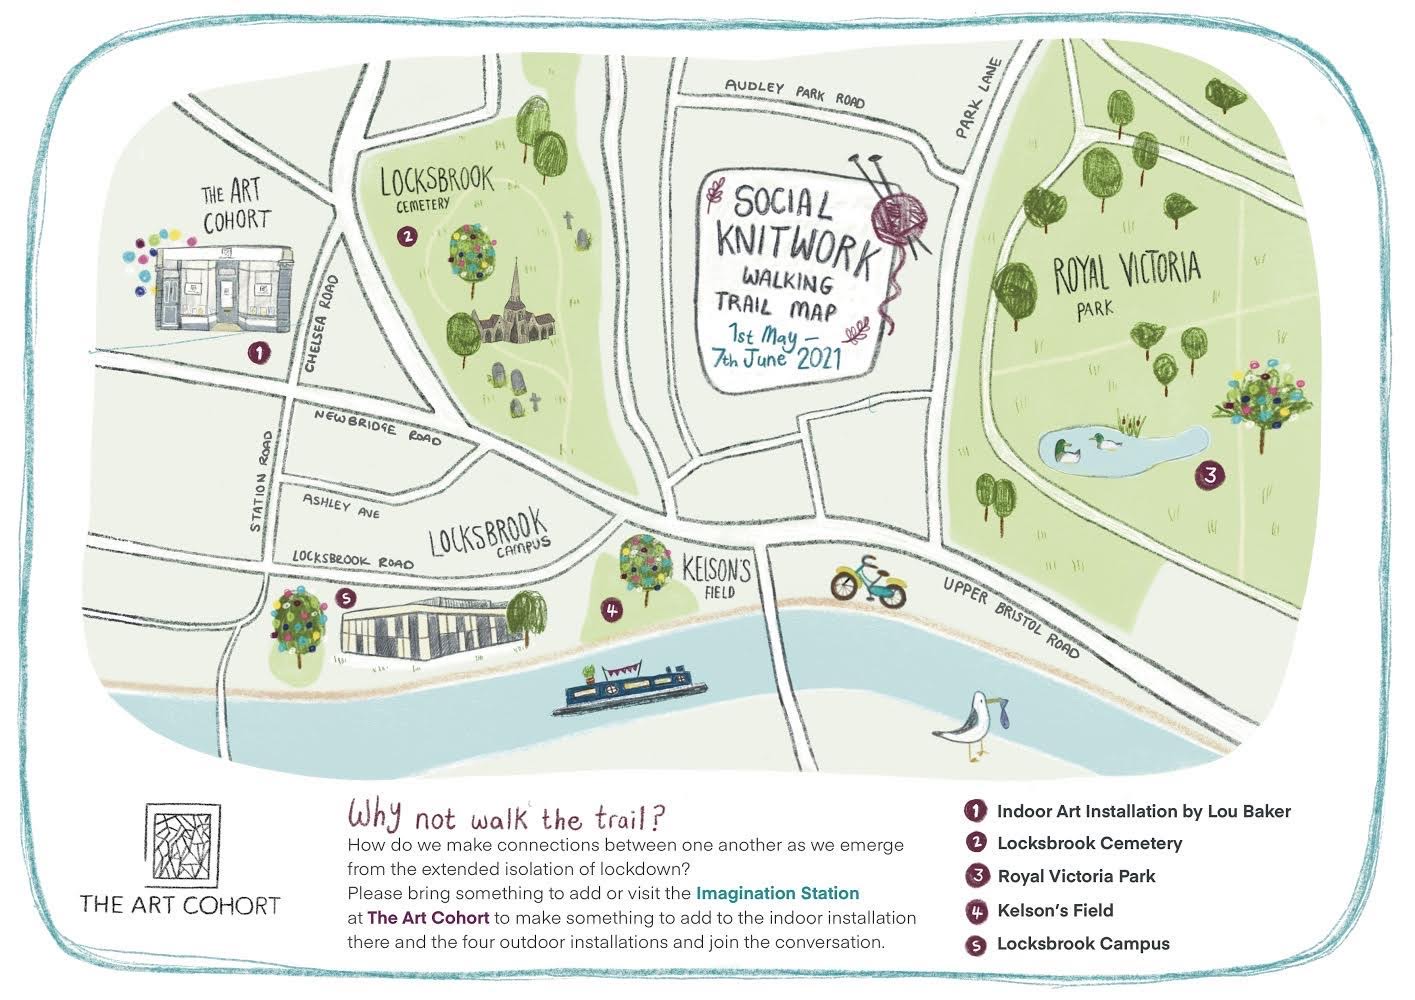 A map showing the locations of Social Knitwork installations